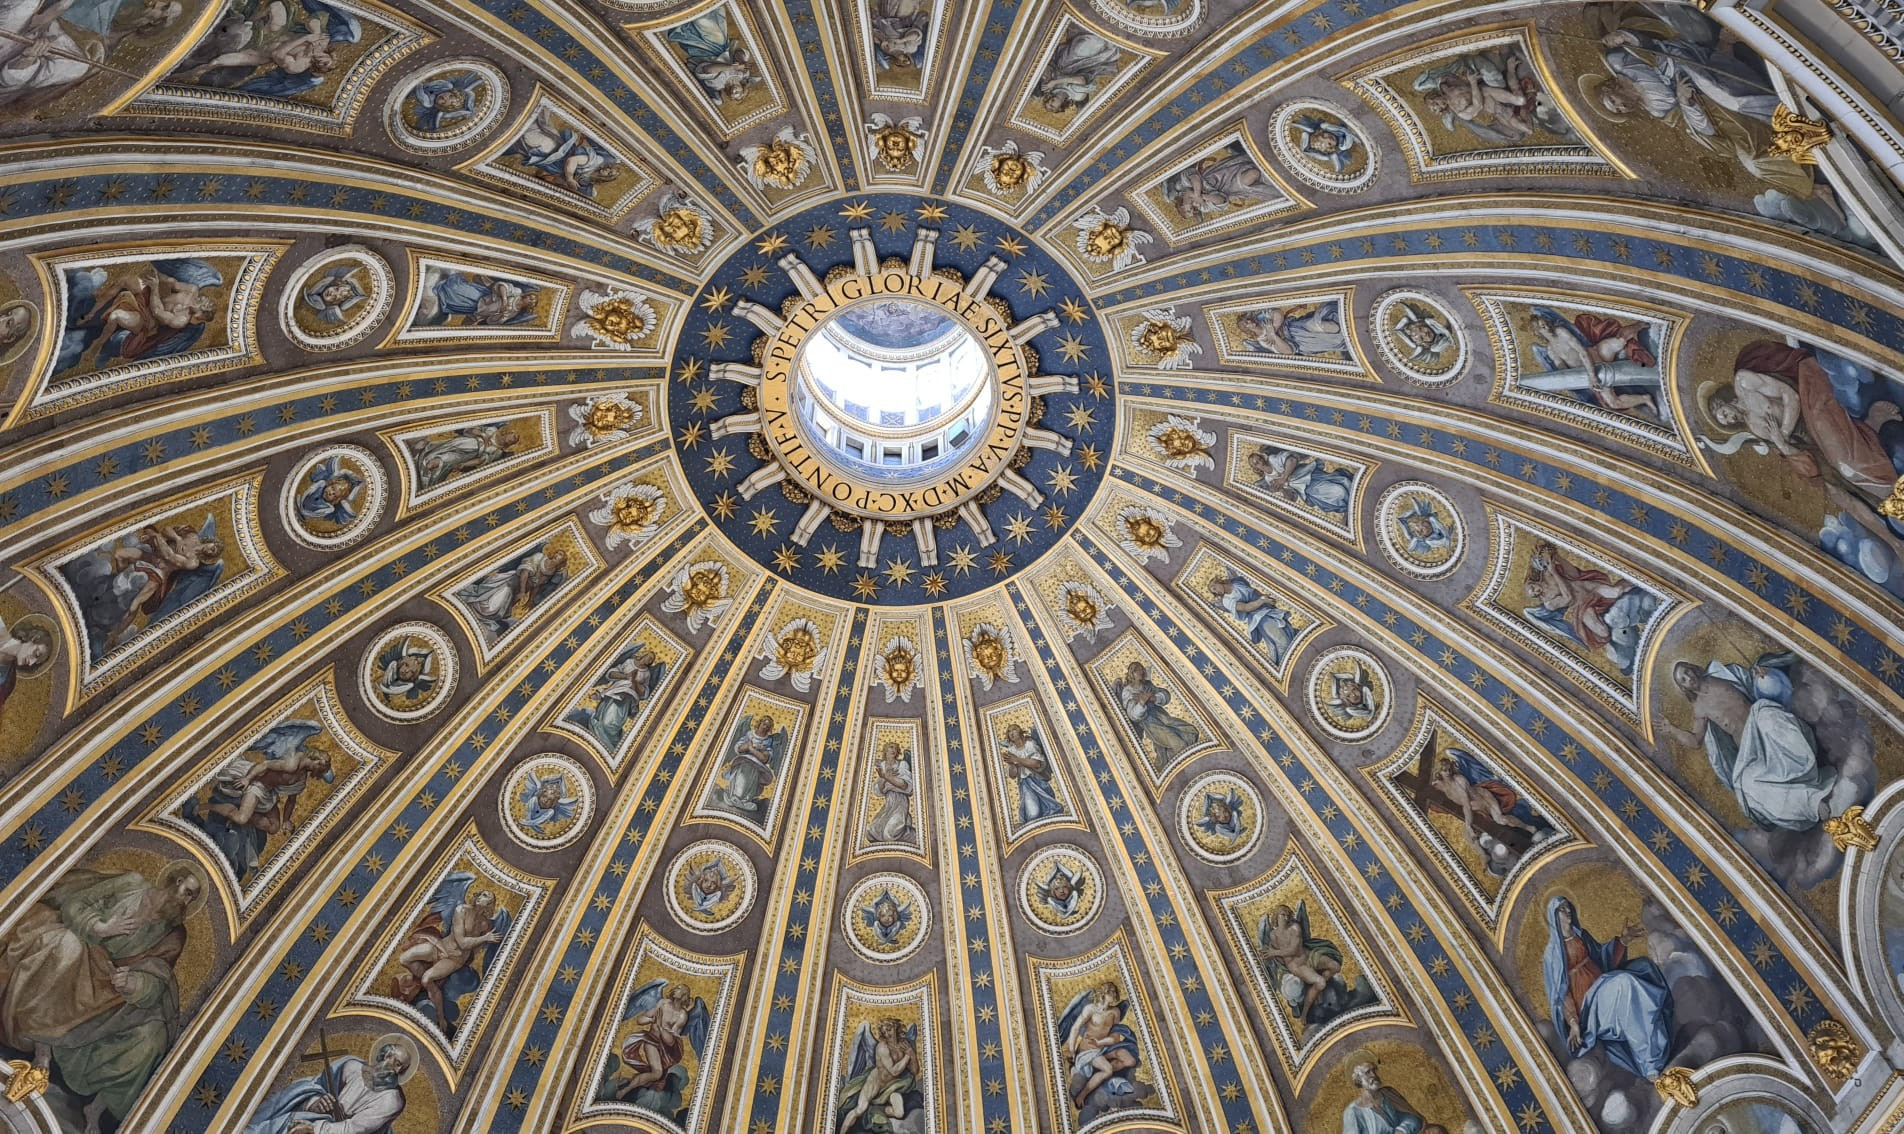 St. Peter's basilica dome